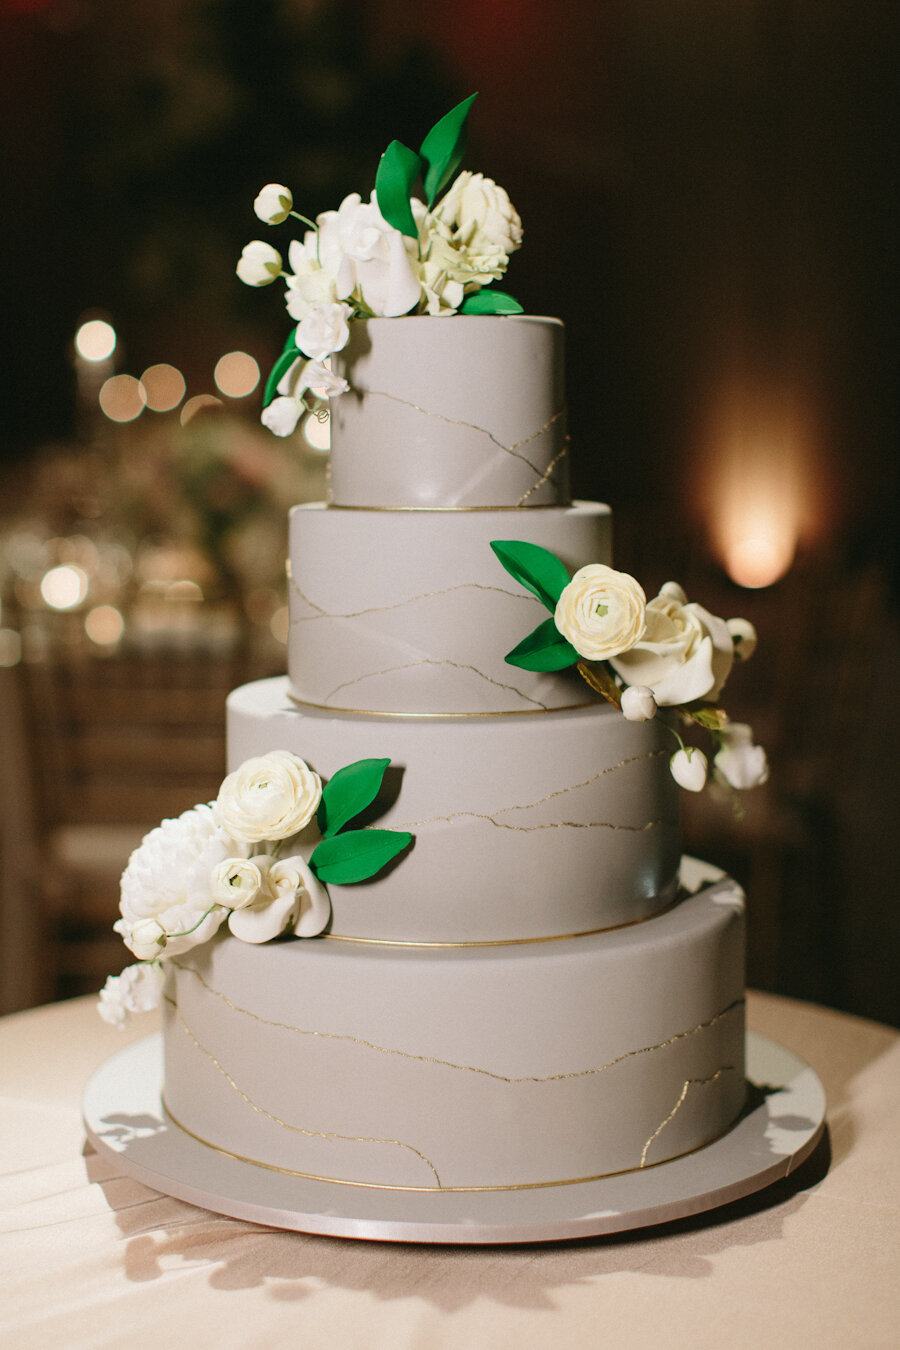 Four Seasons NYC wedding cake in grey with white flowers